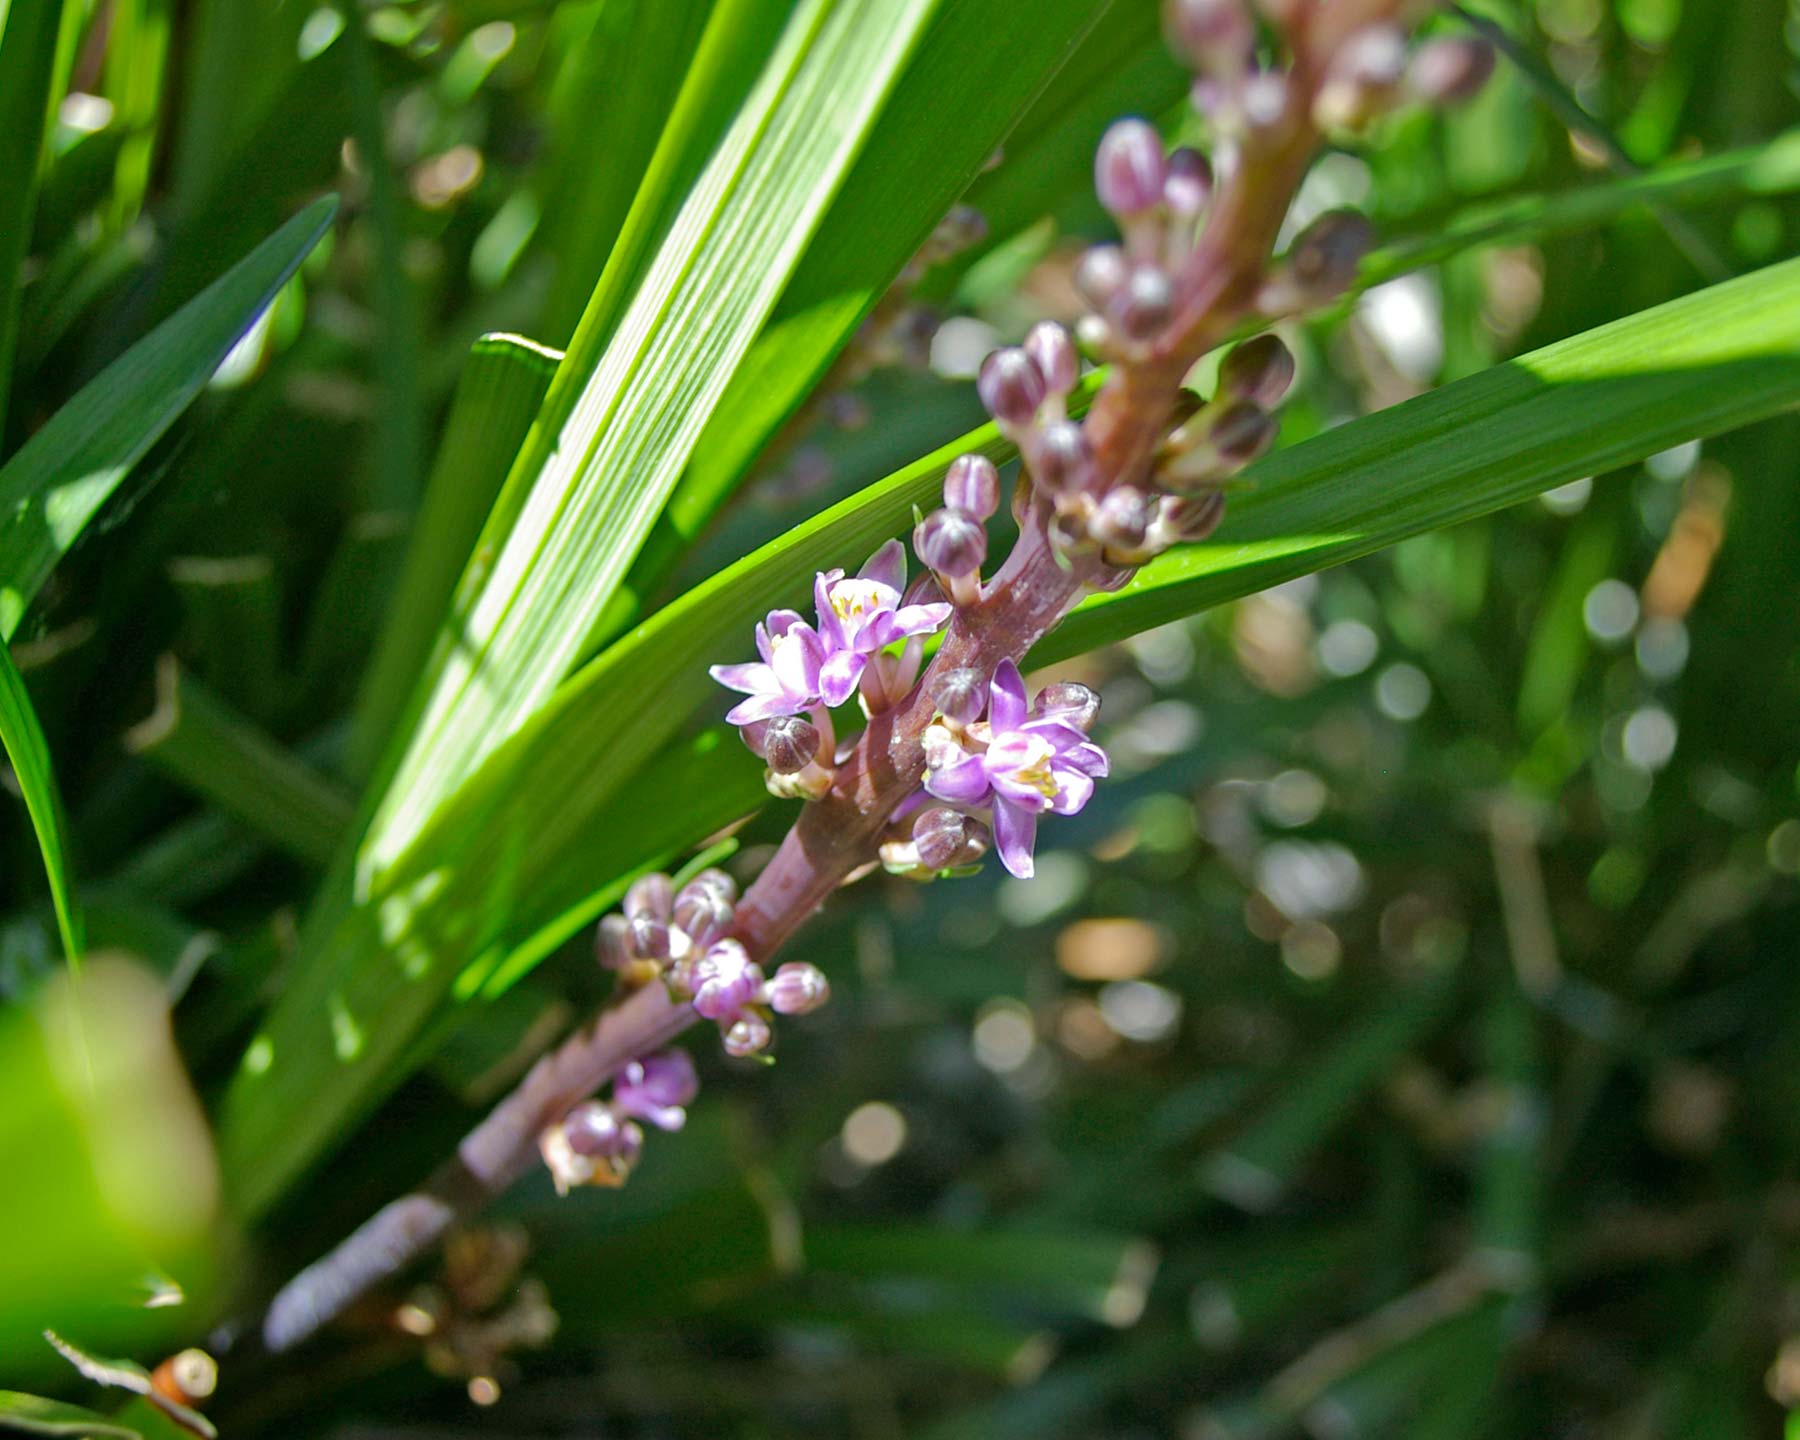 Liriope spicata - violet brown stems and pale violet flowers